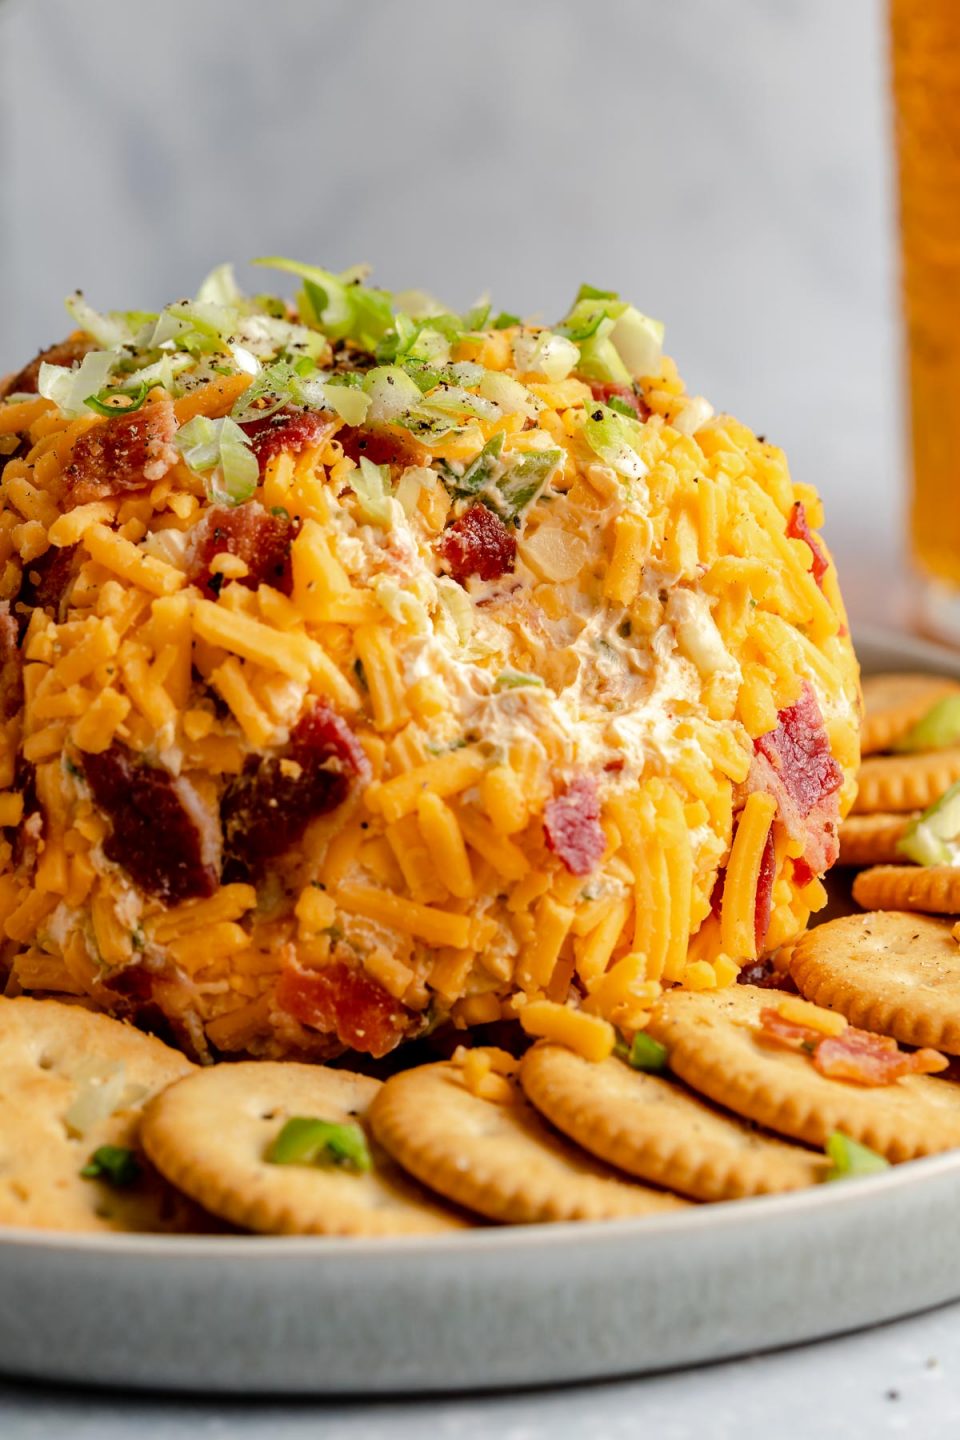 A side angle shot of a Bacon Cheddar Cheese ball sits atop a gray ceramic platter surrounded by a ring of Ritz crackers. The platter rests atop a gray-blue textured surface. A scoop of the cheese ball has been removed and a pint of beer sits in the background out of focus.